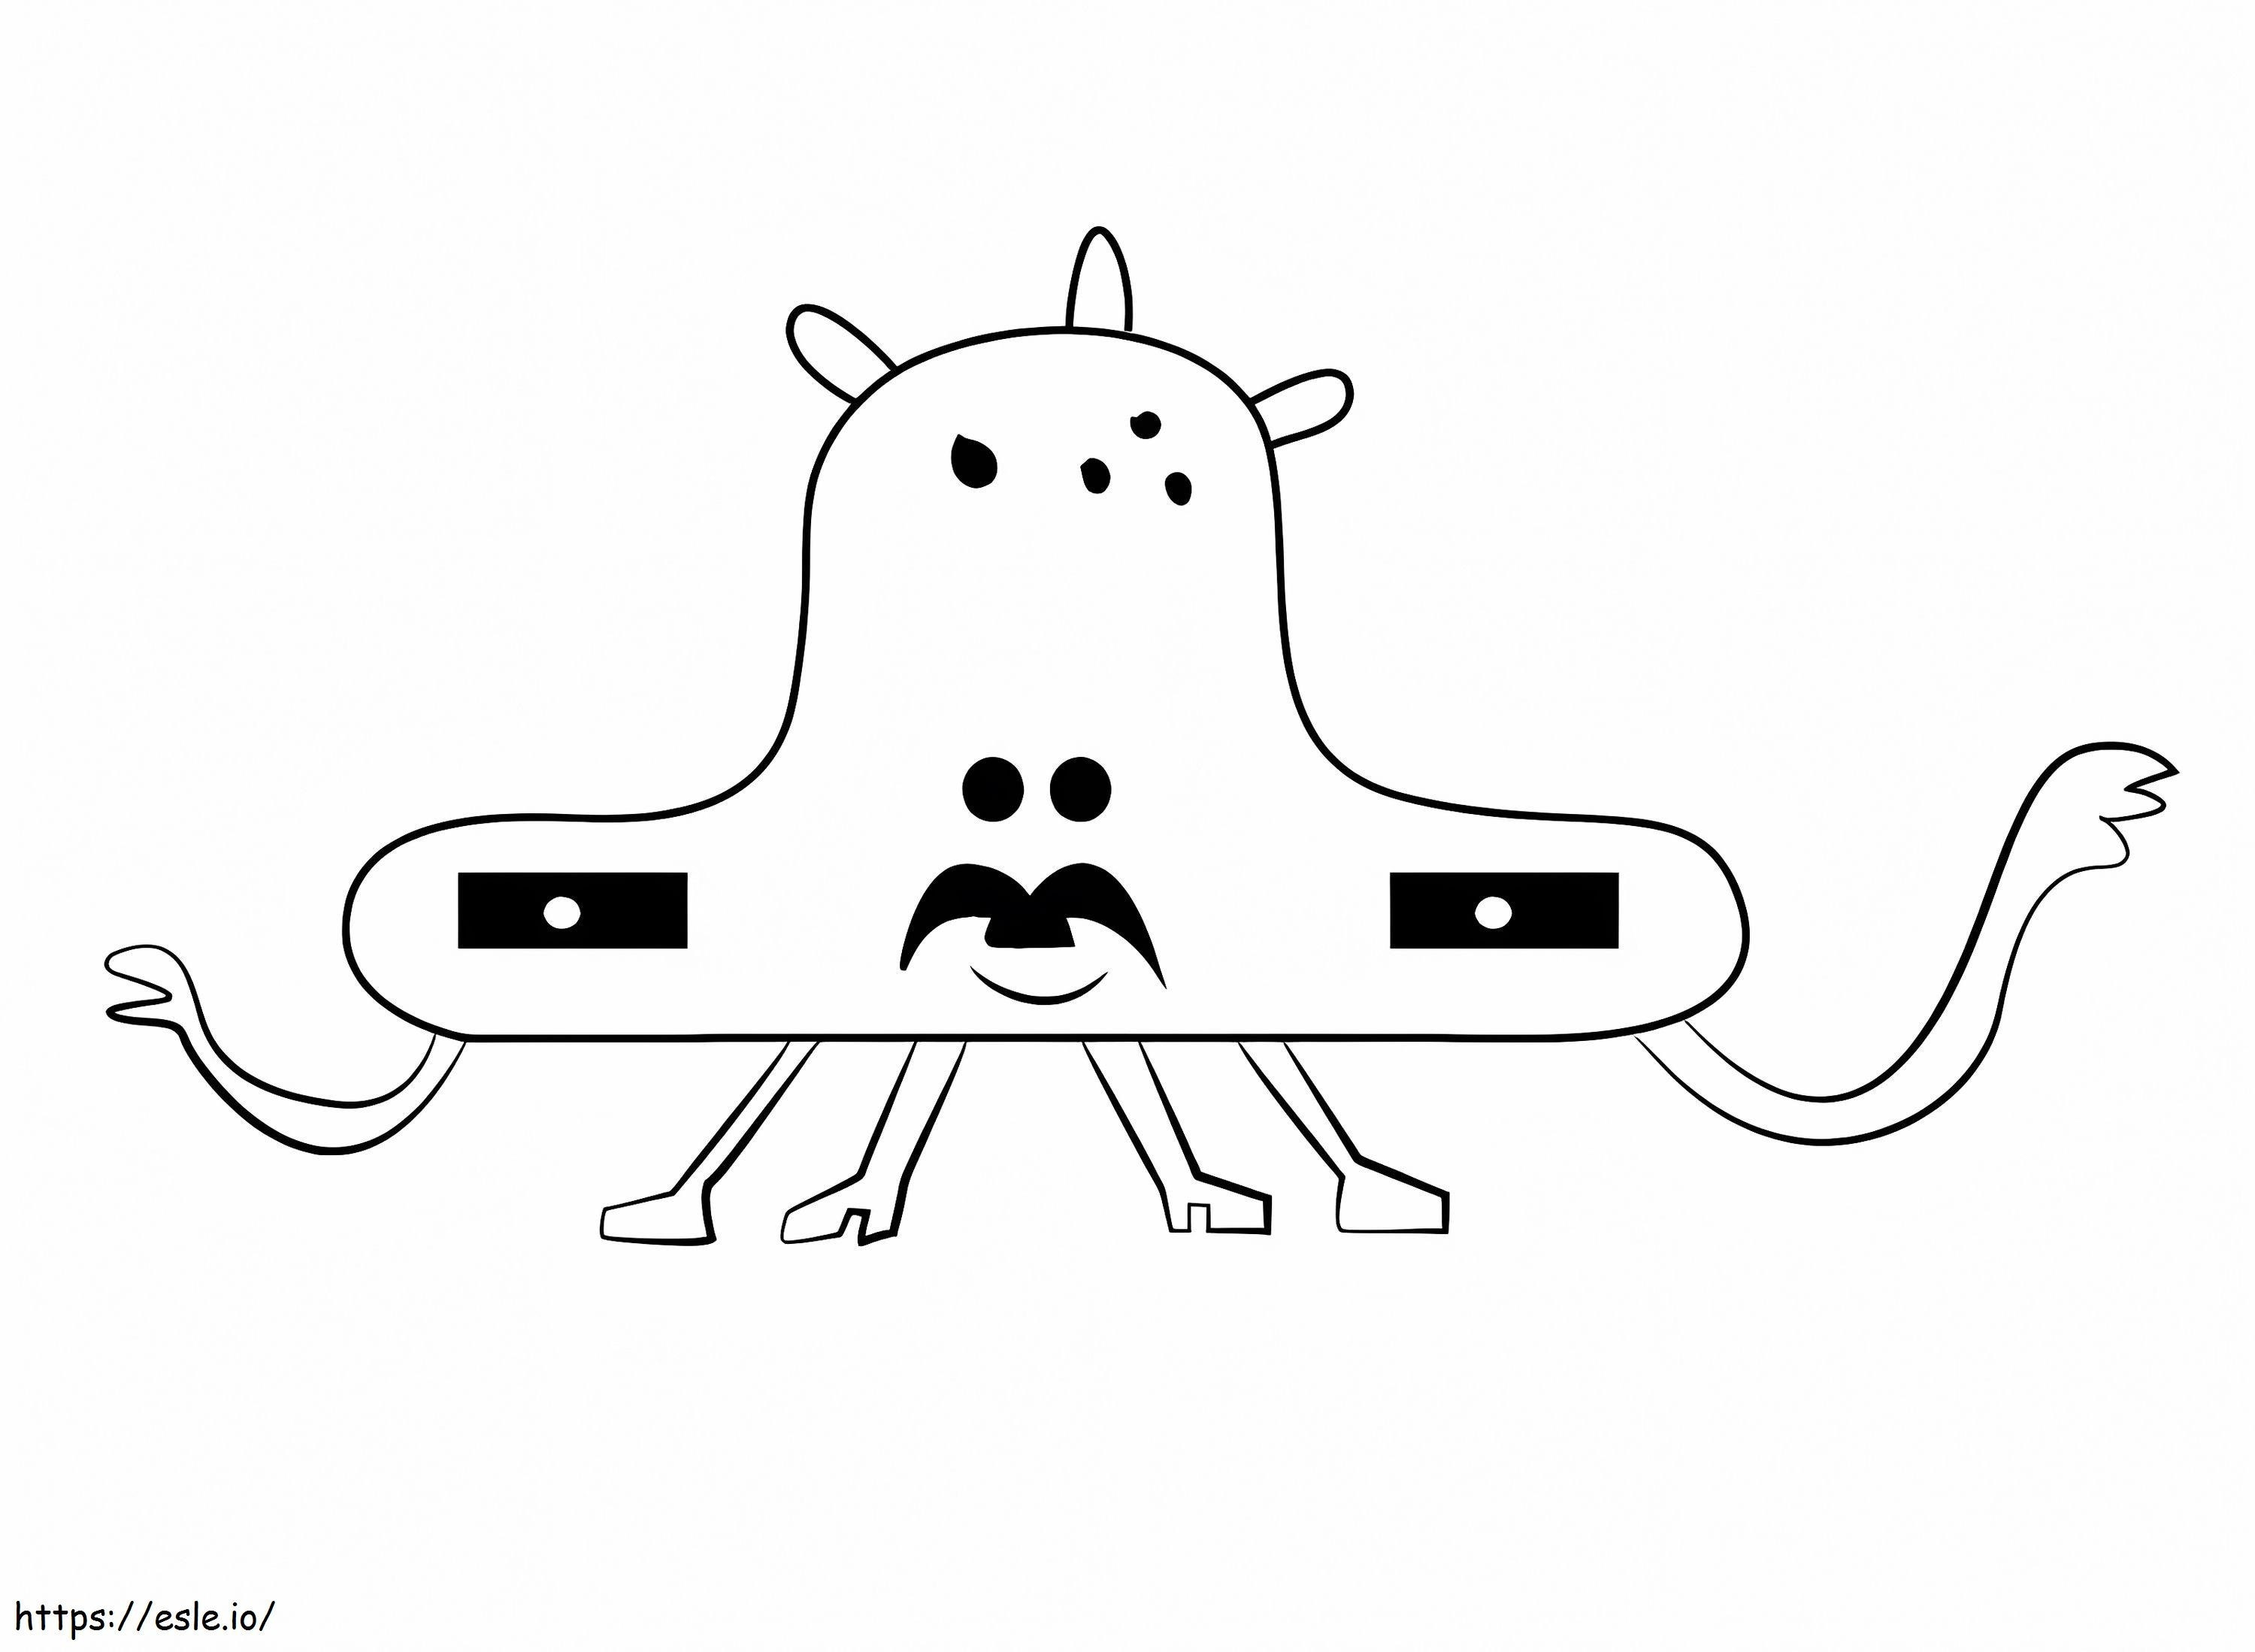 Jerry Undertale coloring page